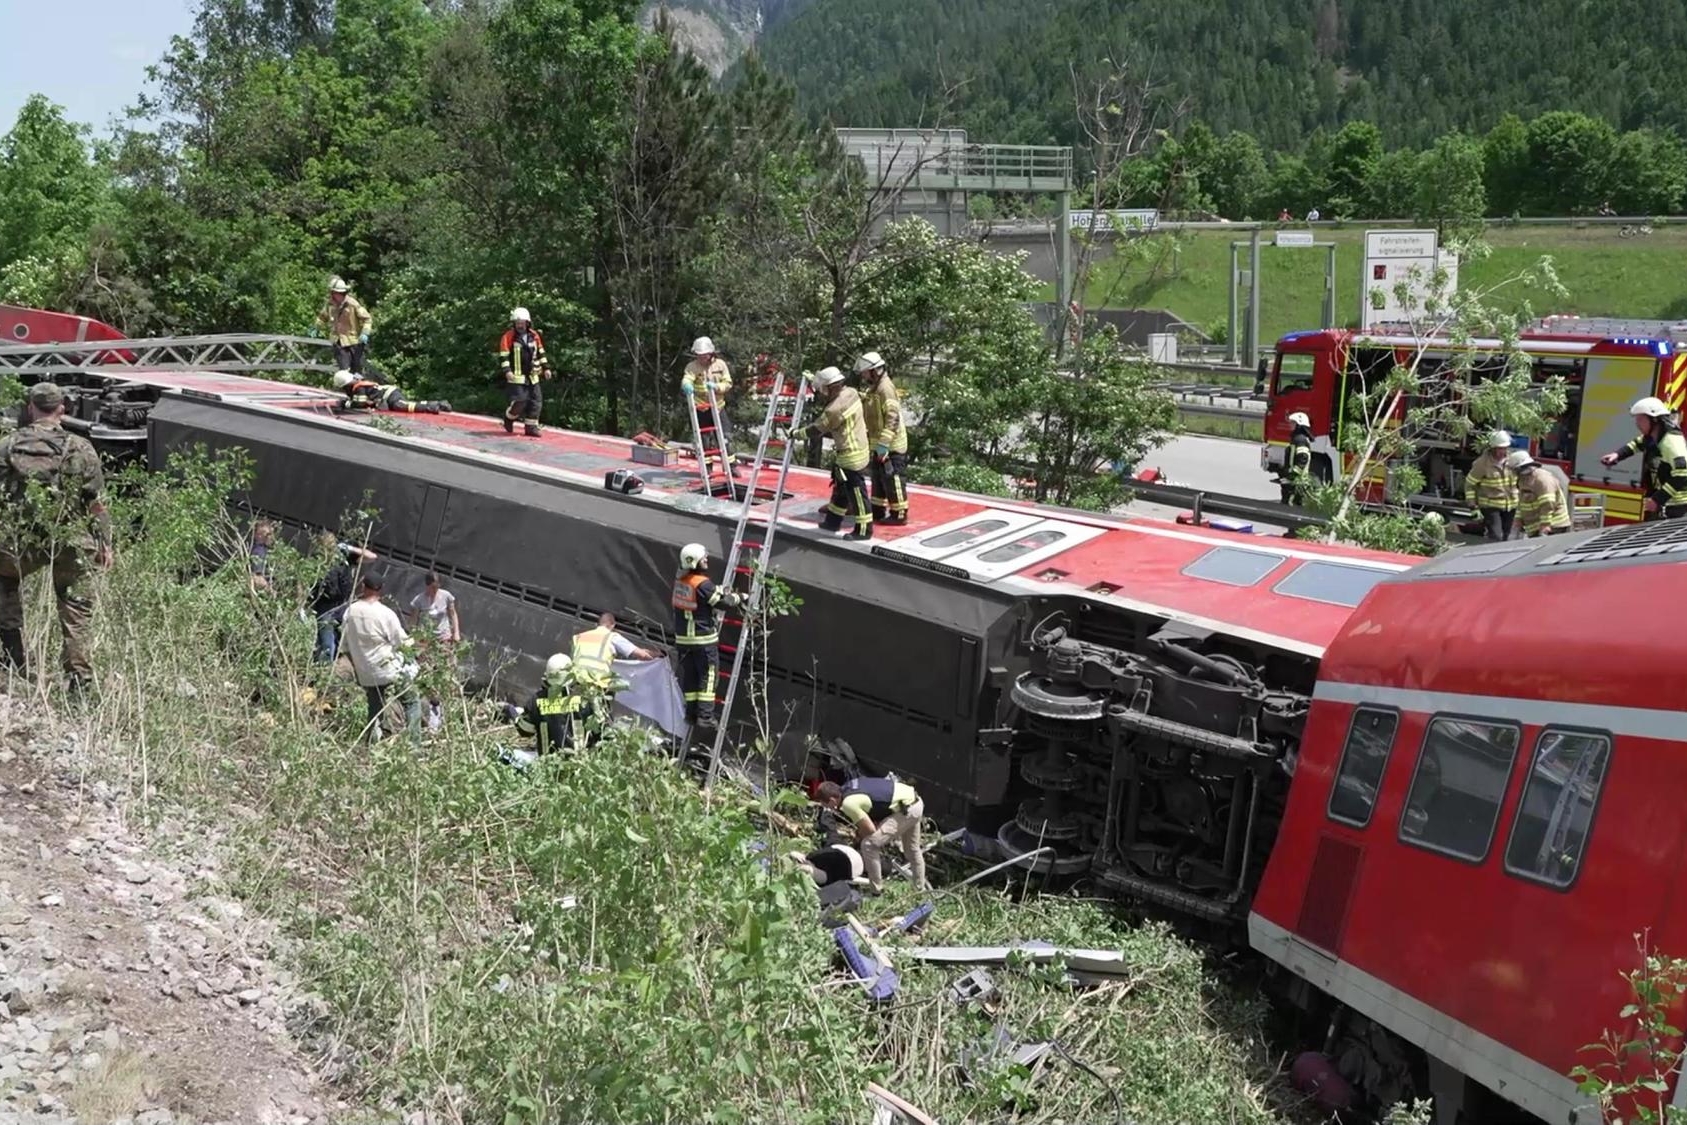 epaselect epa09993745 Emergency responders work at the scene of a train derailment in Burgrain, near the resort town of Garmisch-Partenkirchen, southern Germany, 03 June 2022. According to the police and local officials, at least 3 people are reported dead and dozens were injured in the train derailment. The regional train was heading north from the German Alps towards Munich. EPA/NETWORK PICTURES